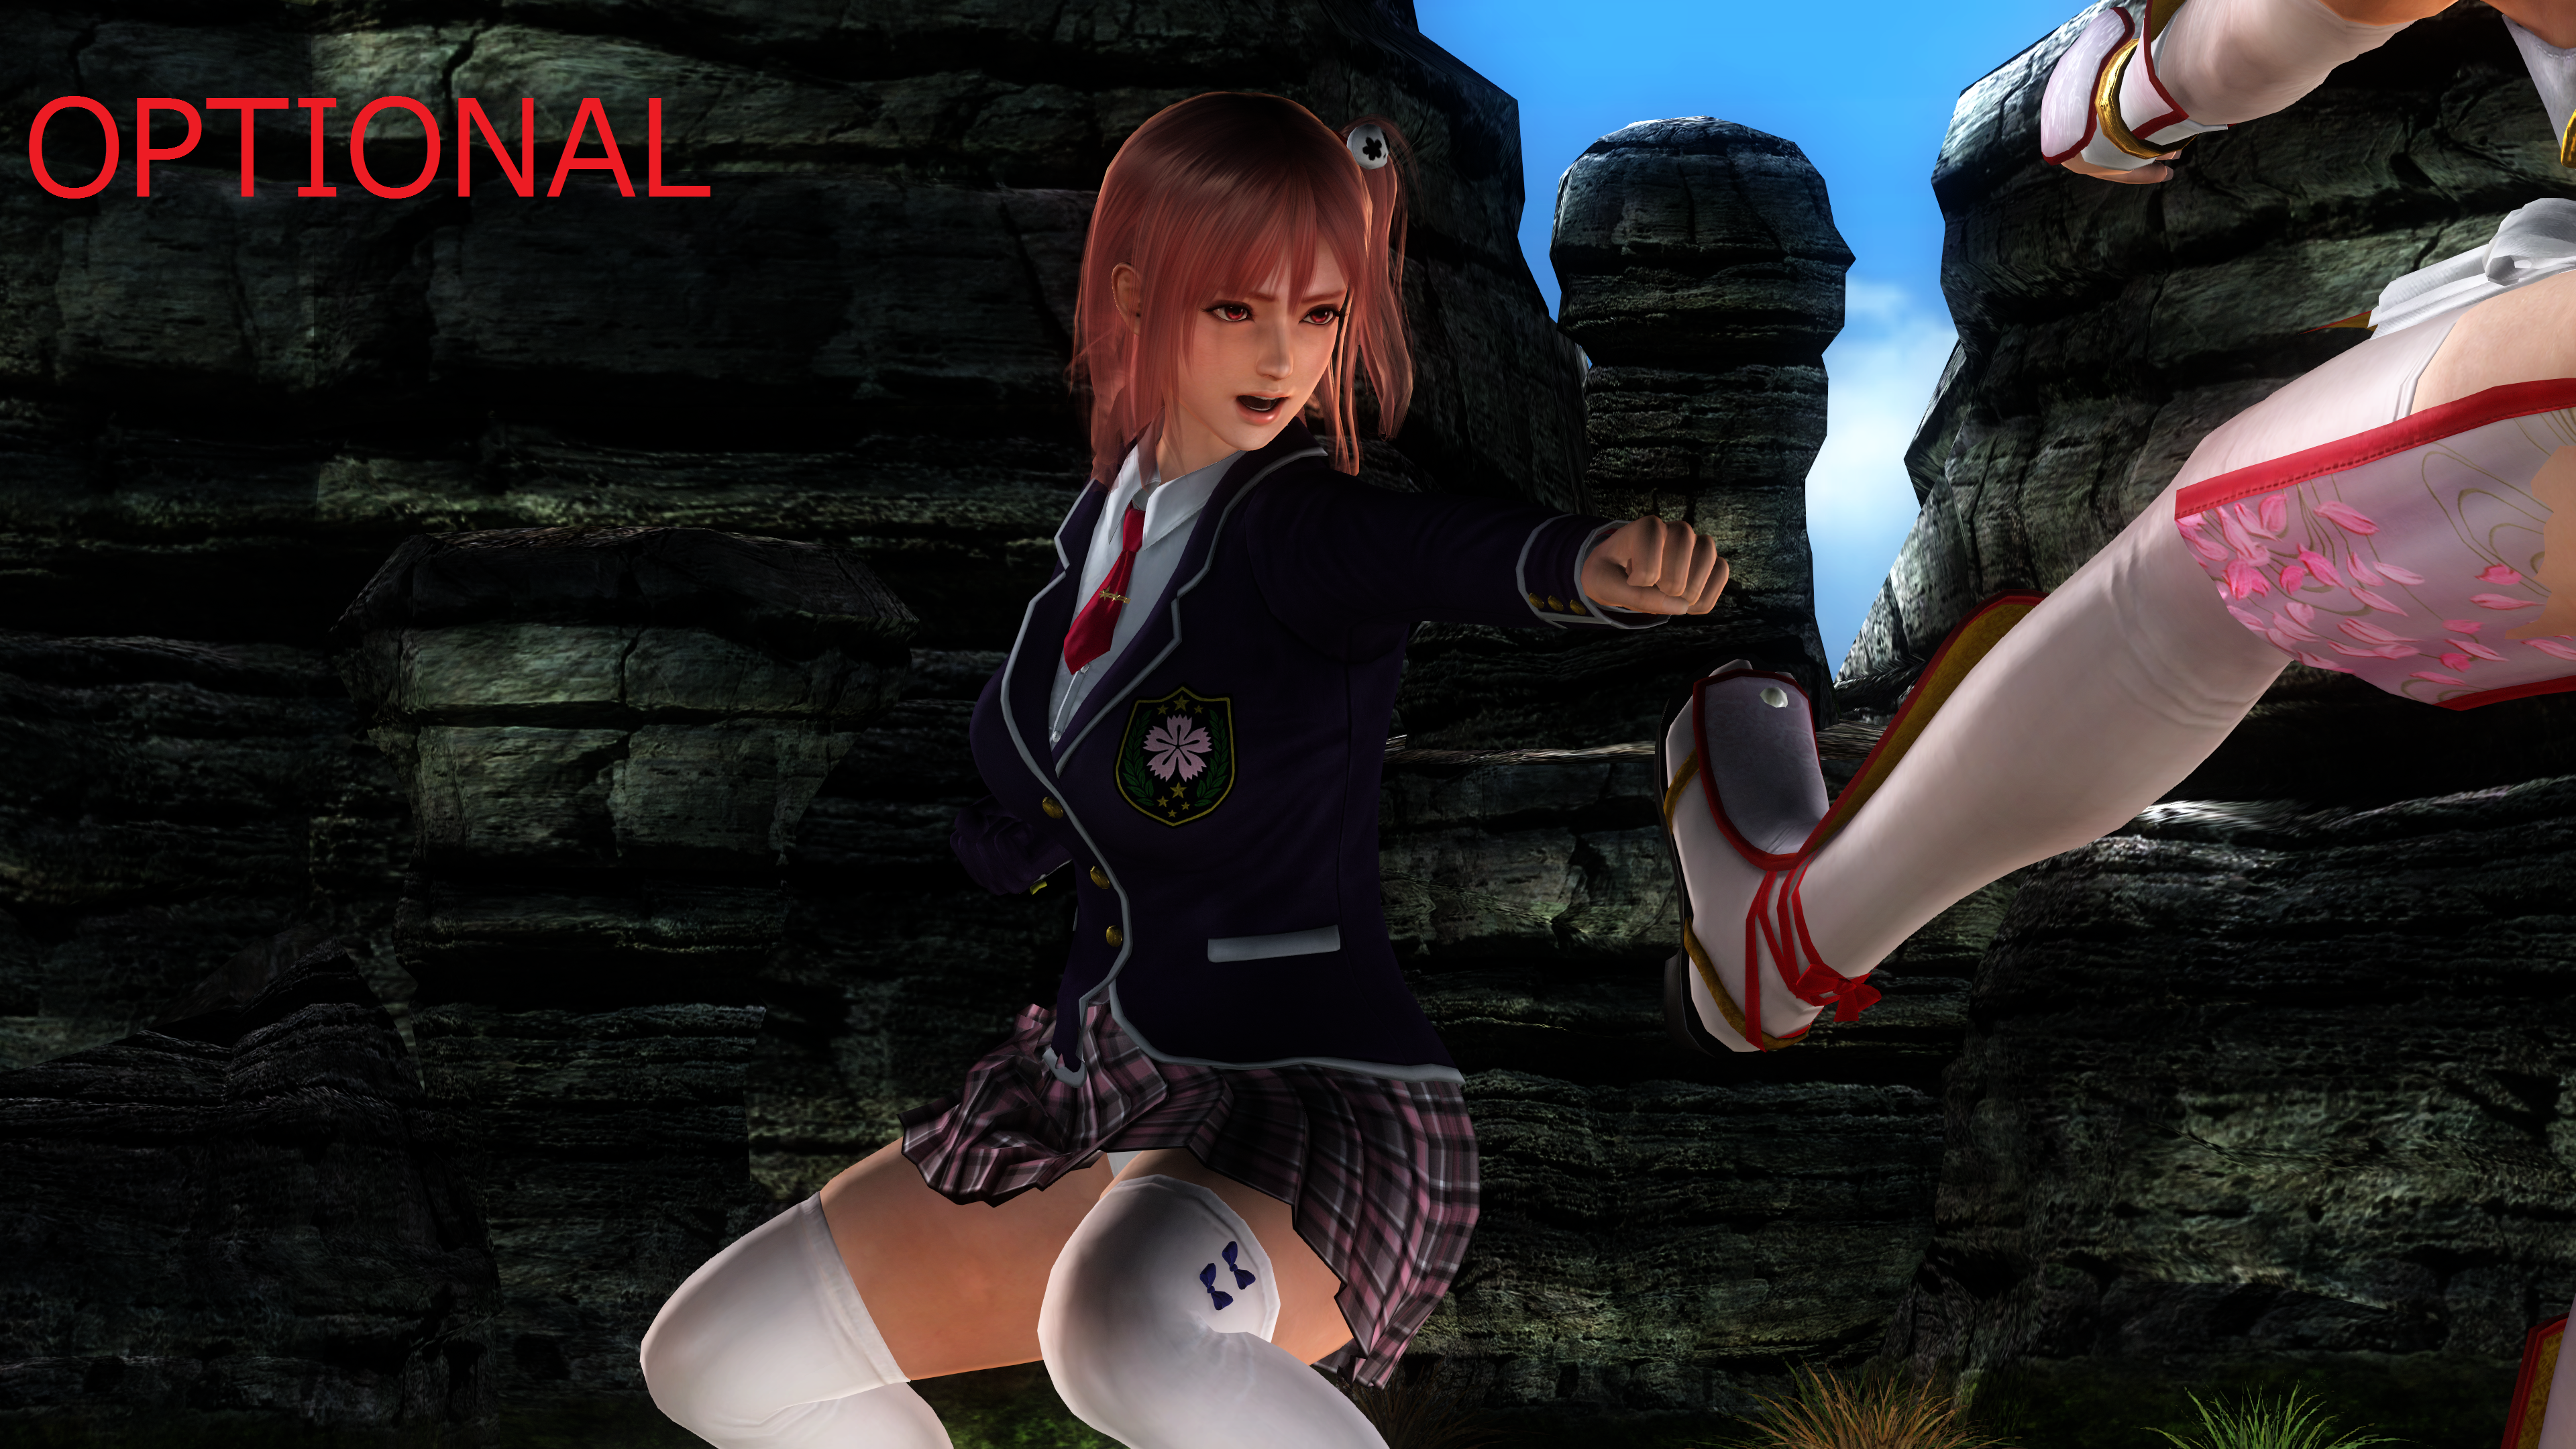 dead or alive 5 last round mods list